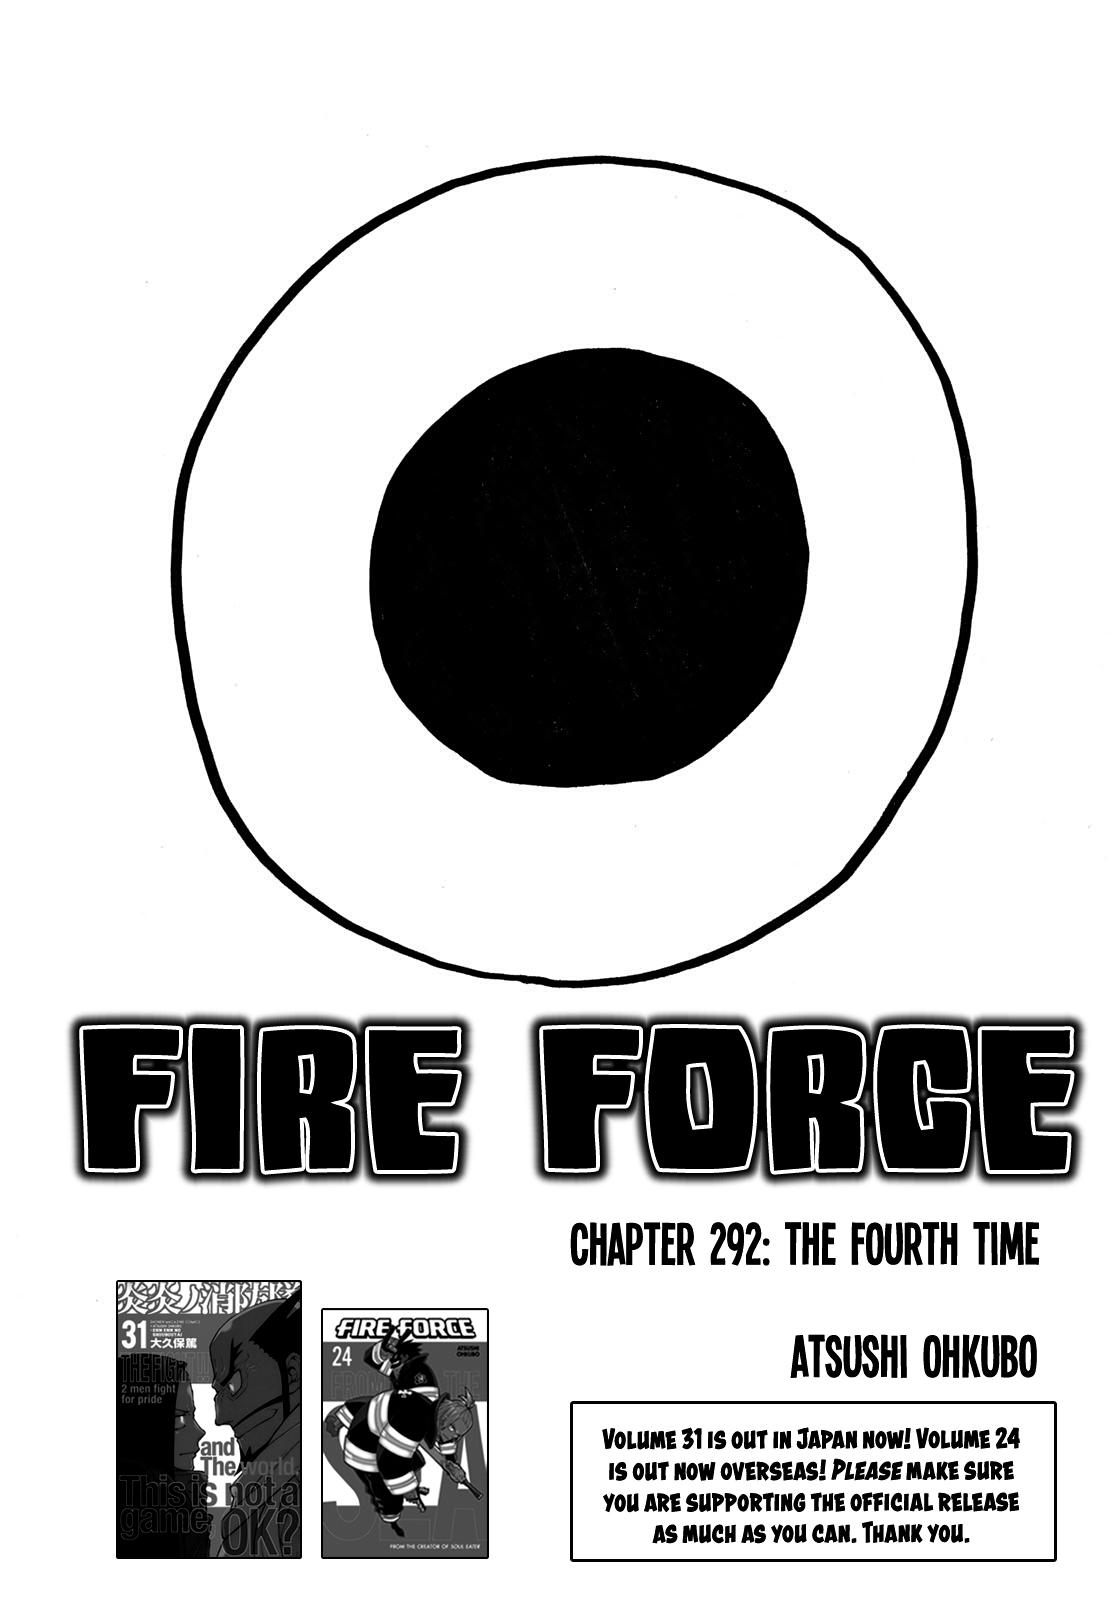 Fire Force Manga Ends in 'A Few' Chapters, 'About' 2 Volumes